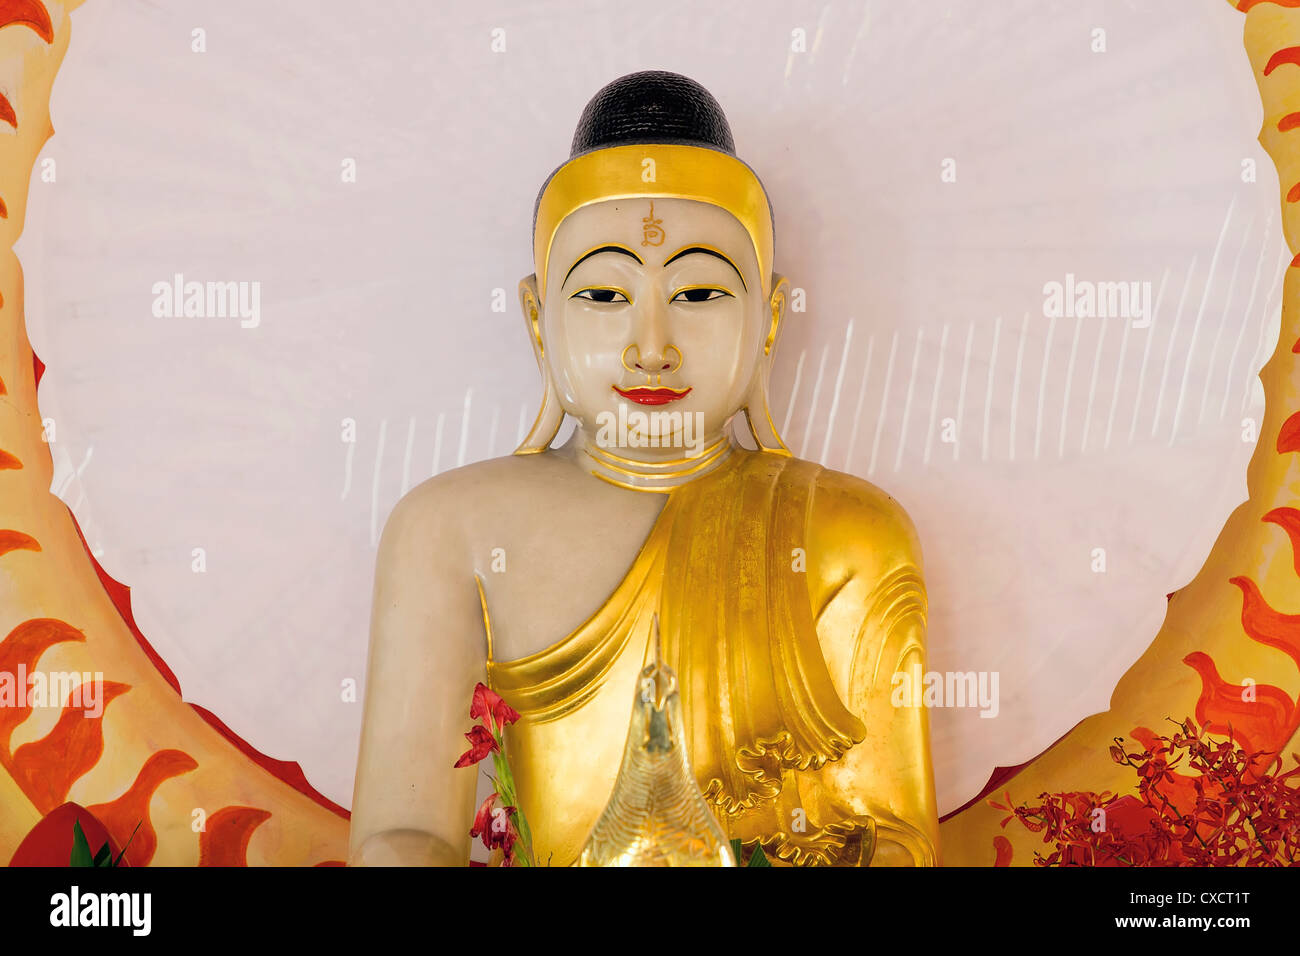 Gold Gilt Buddha Statue Sitting in Thailand Temple Altar Stock Photo